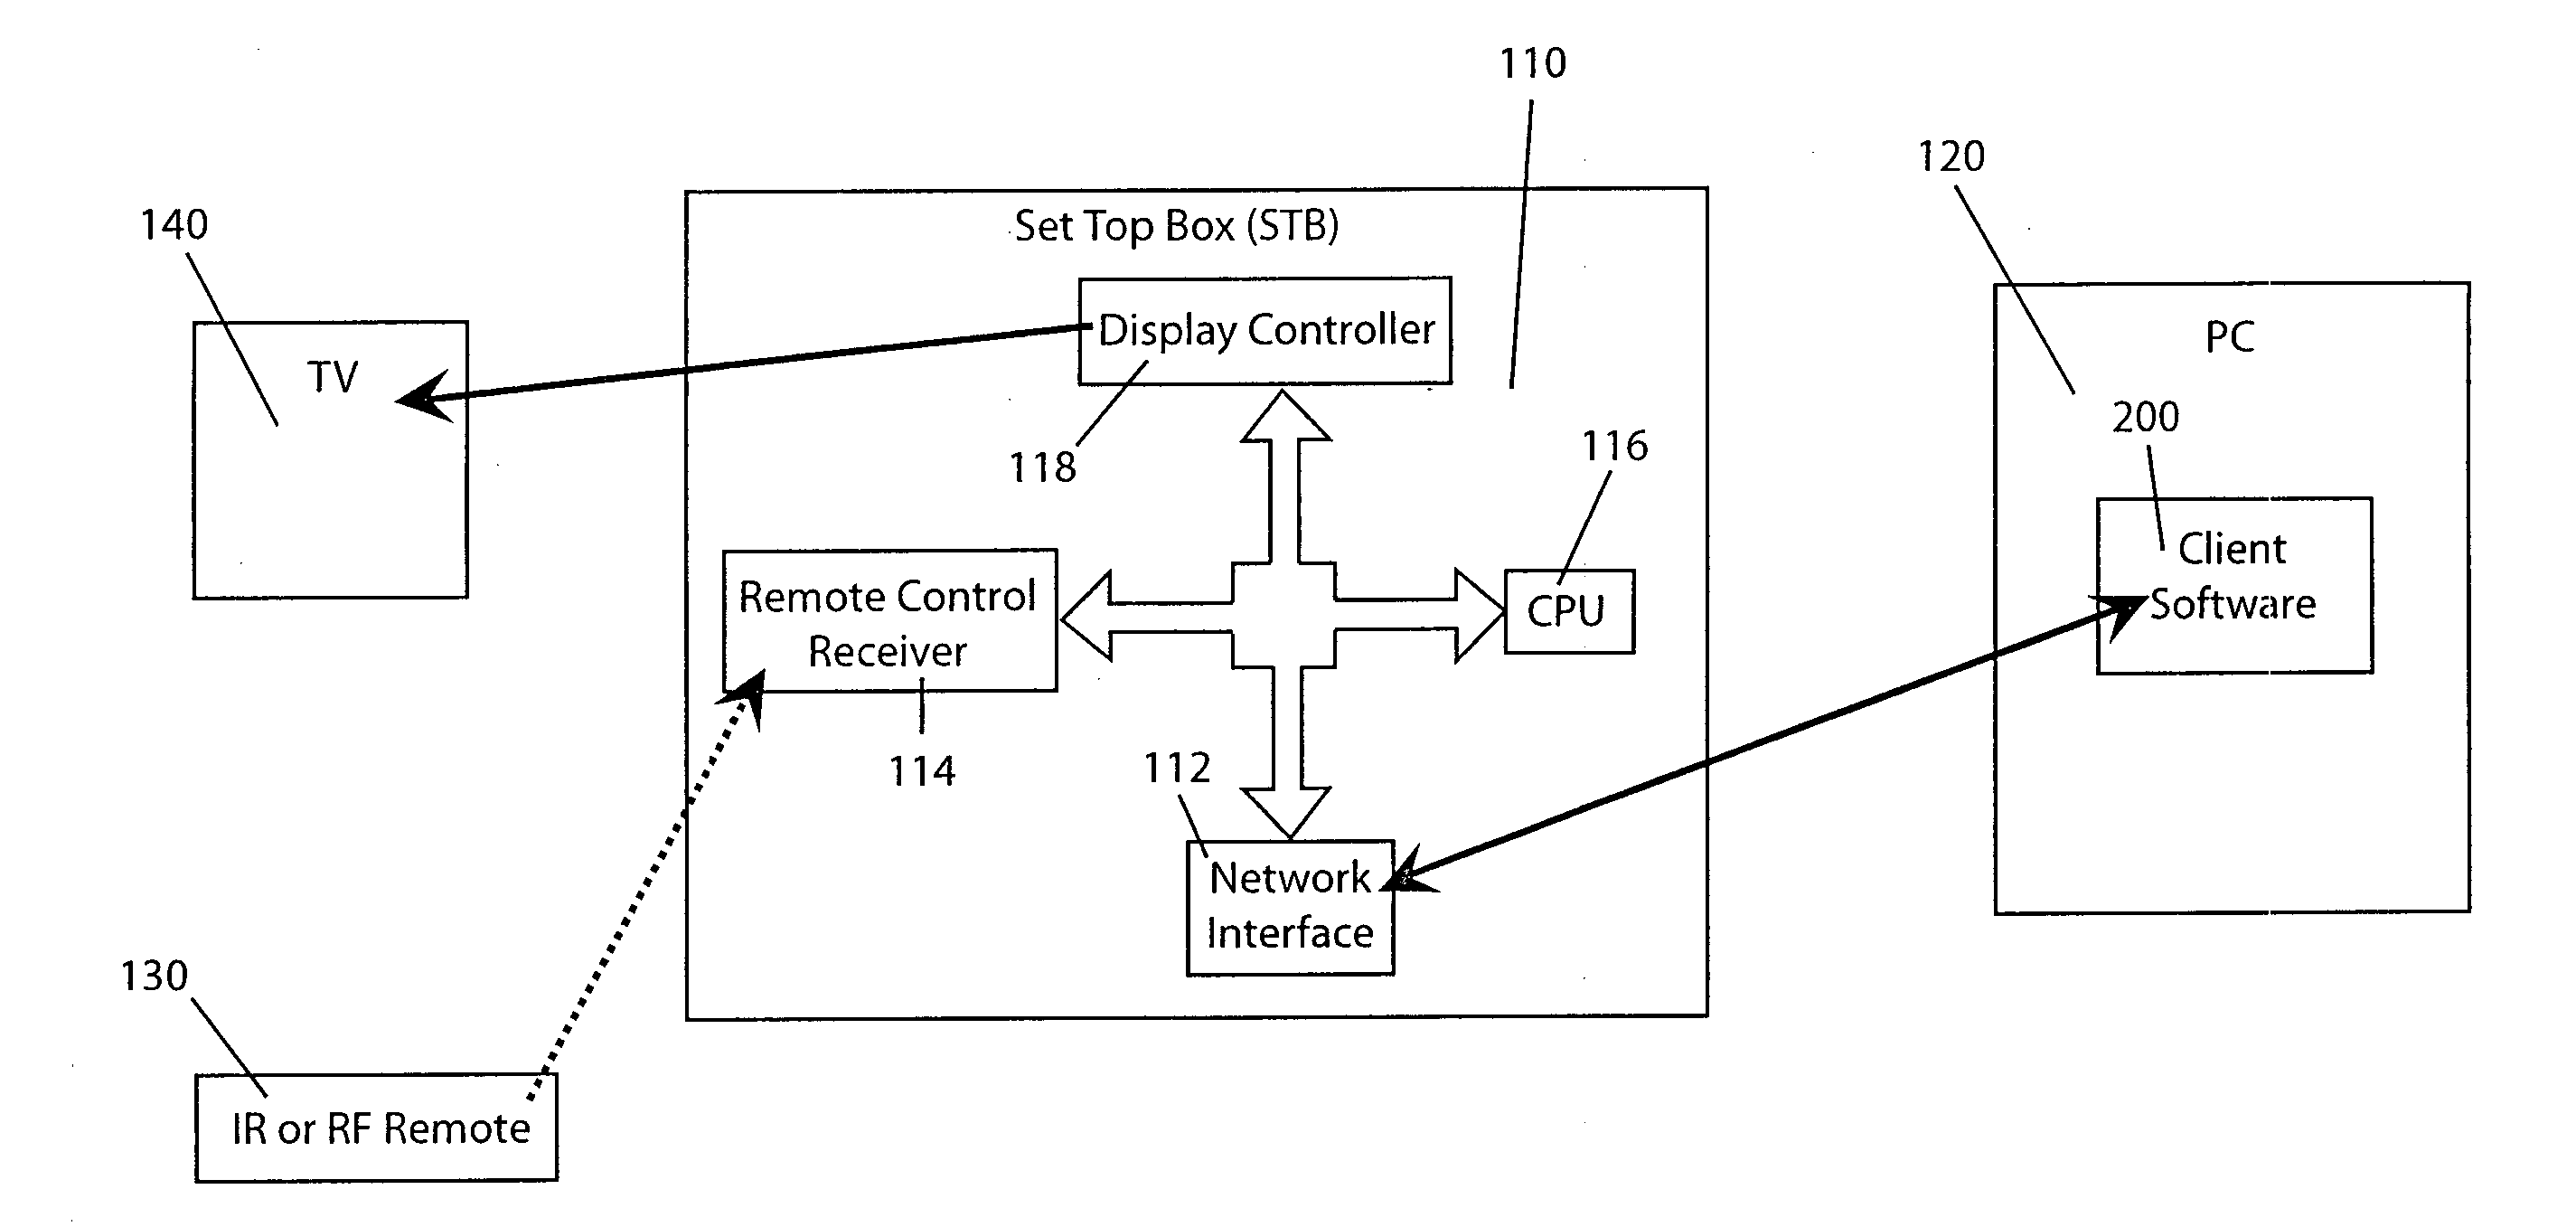 System and method for viewing and controlling a personal computer using a networked television